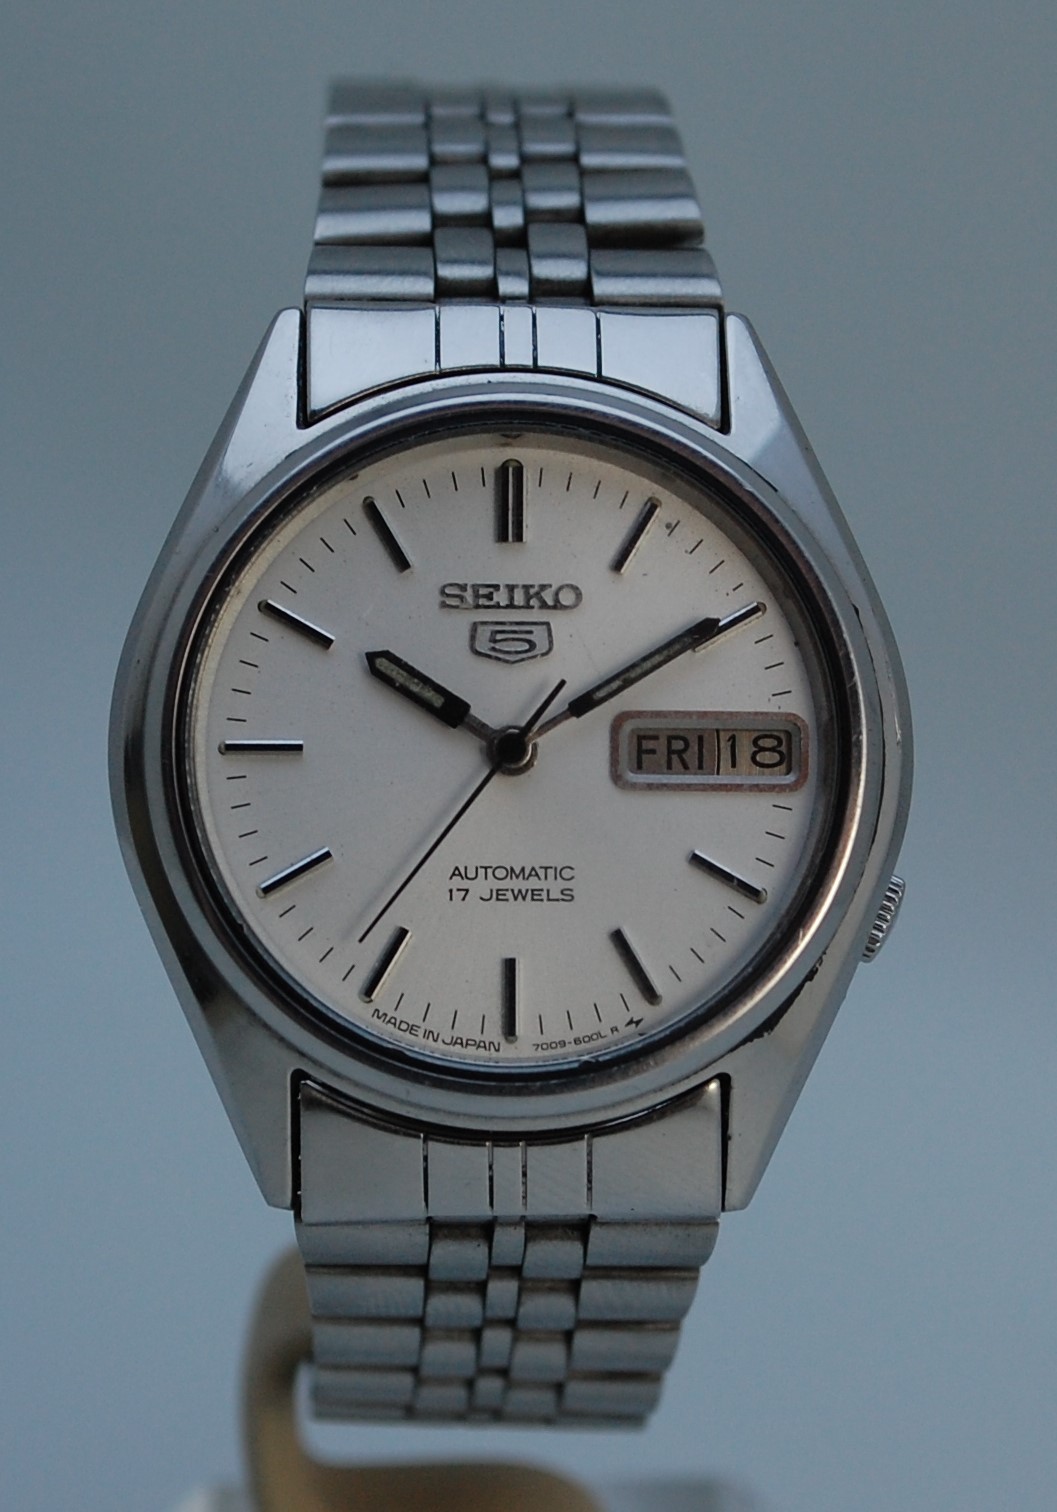 SOLD 1981 Seiko 5 7009-6001 with box - Birth Year Watches